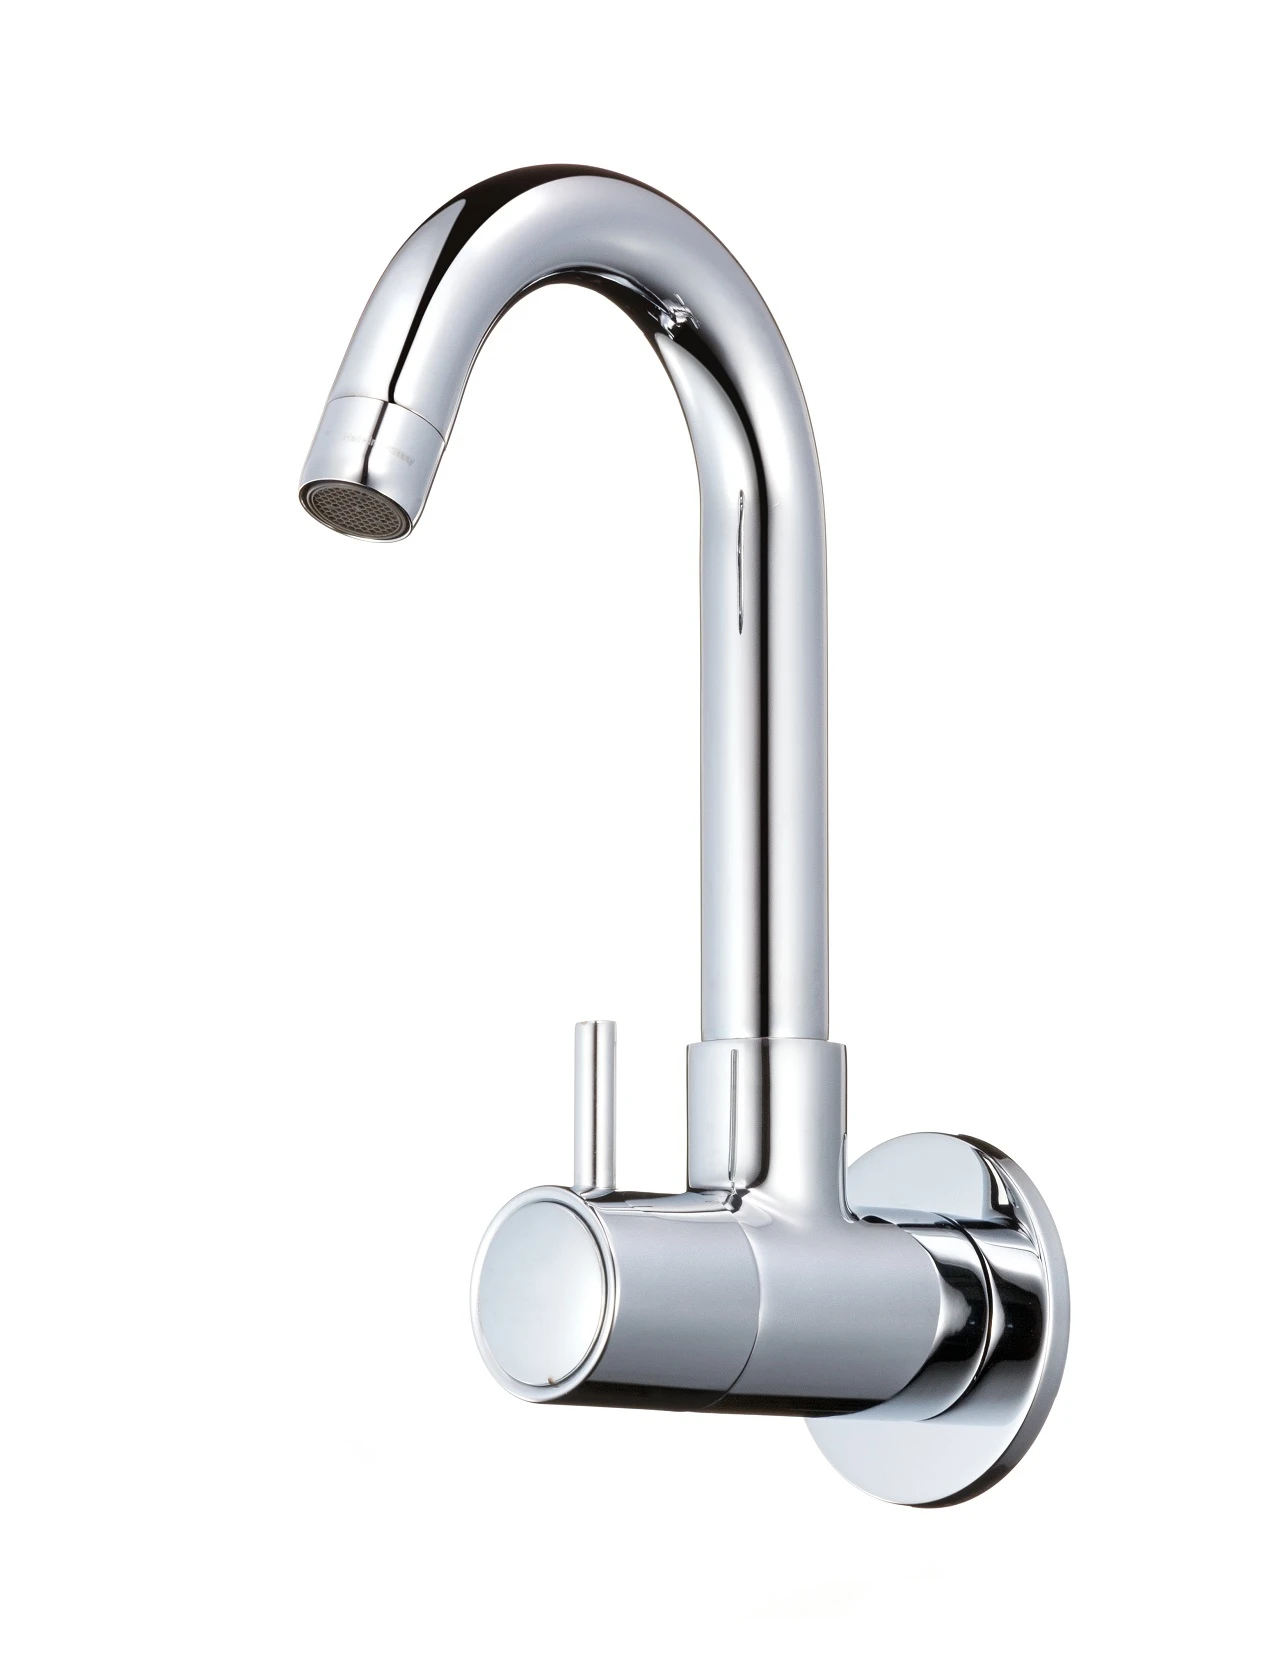 Brass kitchen sink faucet sanitary ware and faucet kitchen sink faucets